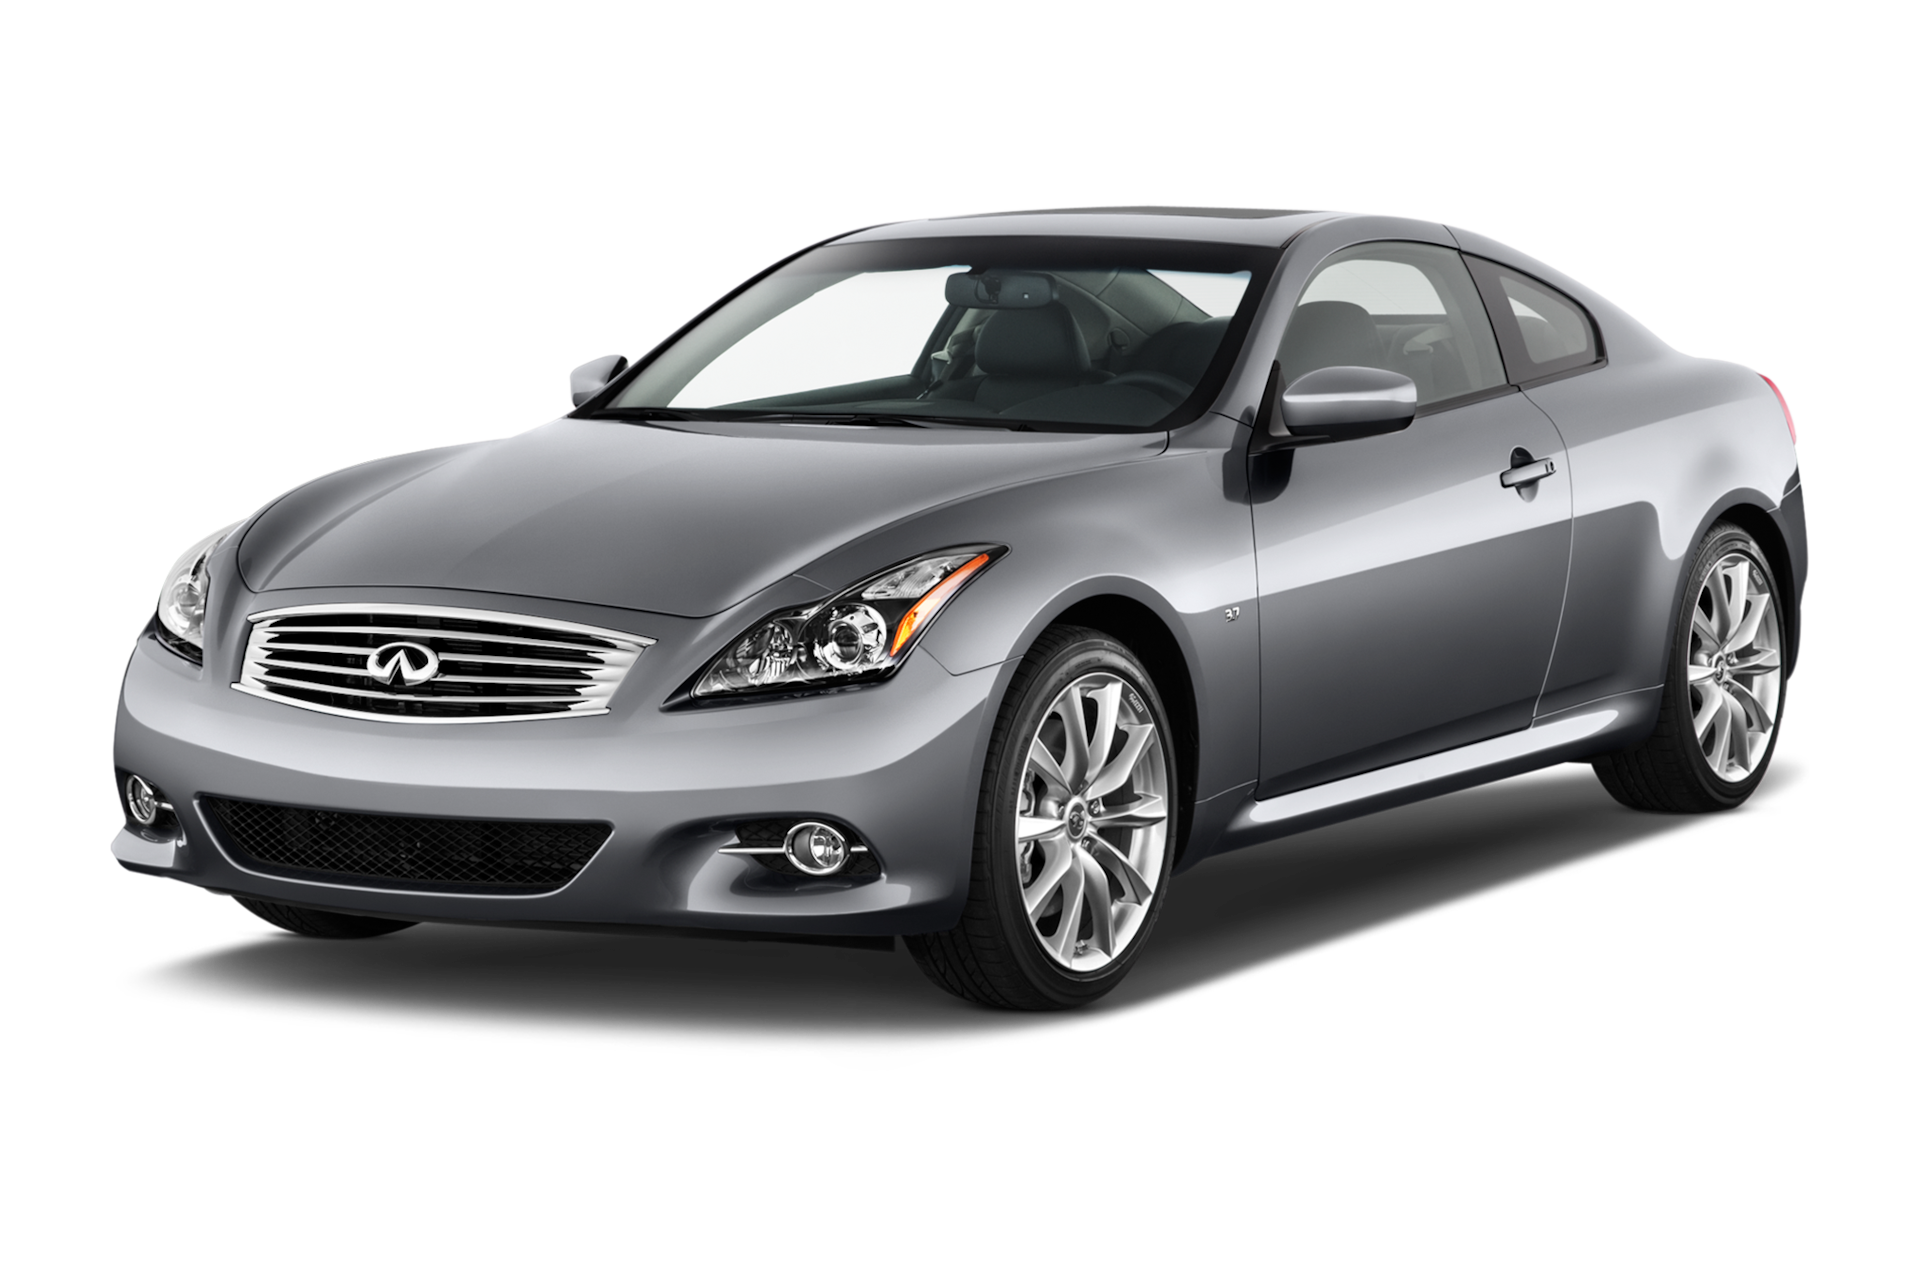 2014 Infiniti Q60 Prices, Reviews, and Photos - MotorTrend